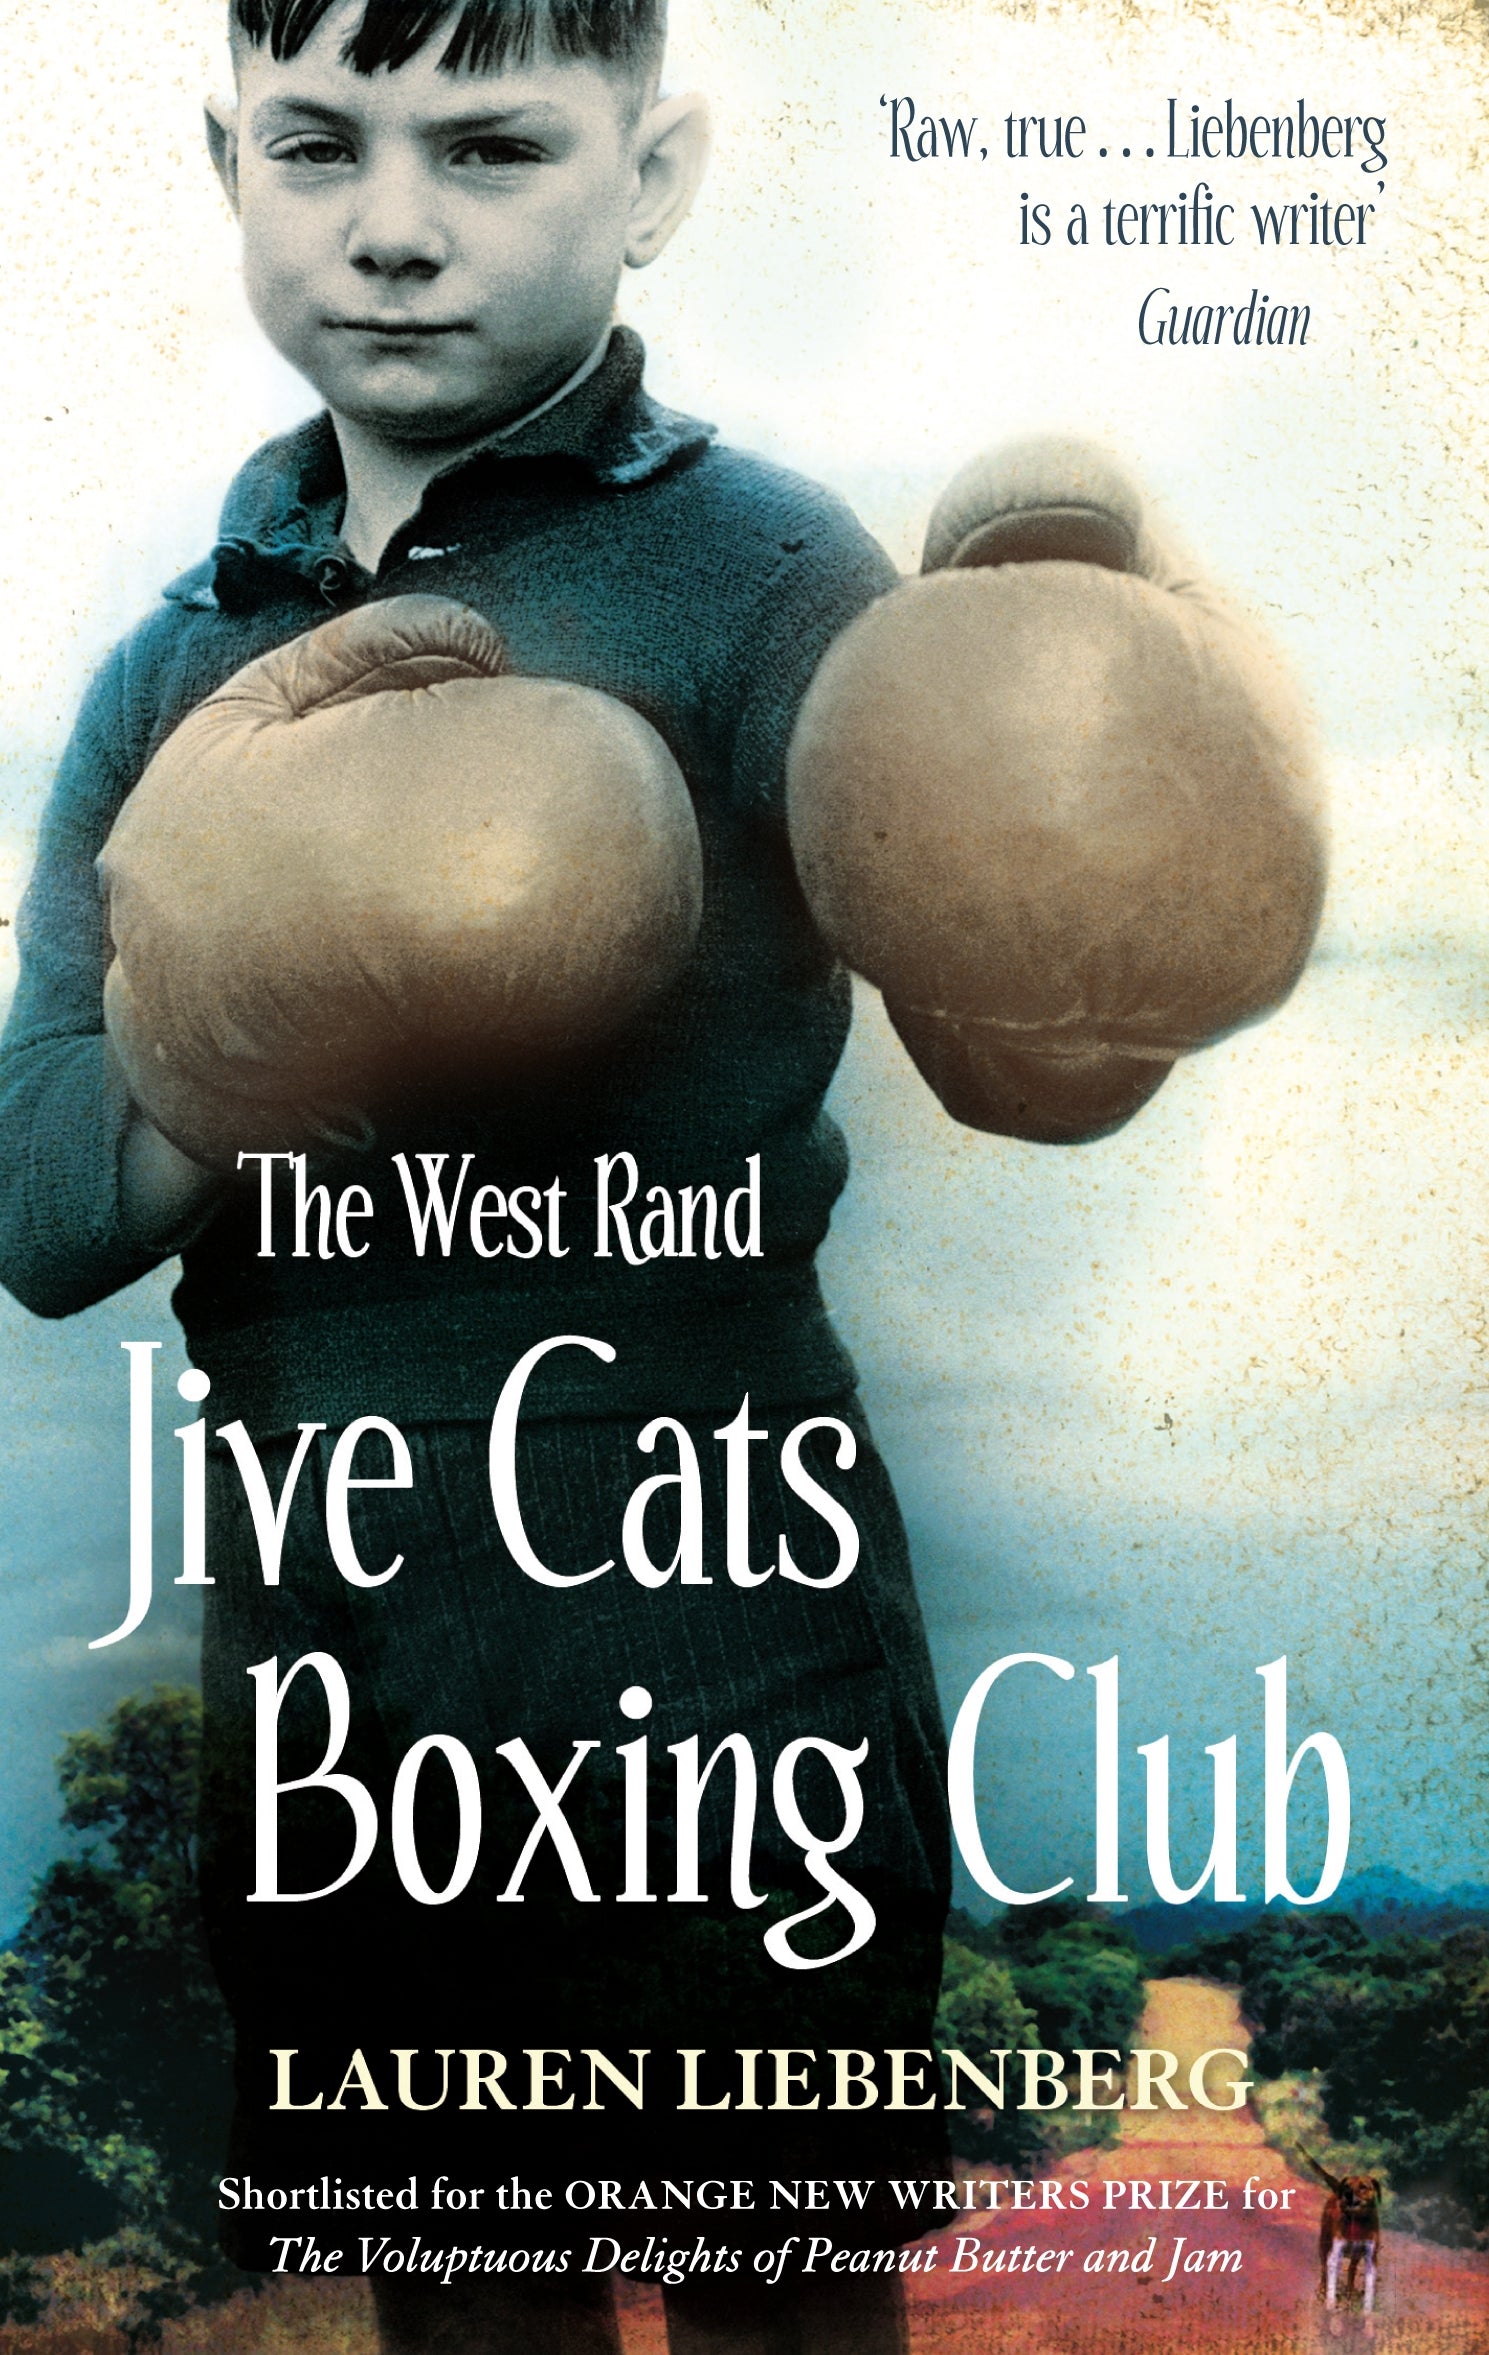 The West Rand Jive Cats Boxing Club by Lauren Liebenberg